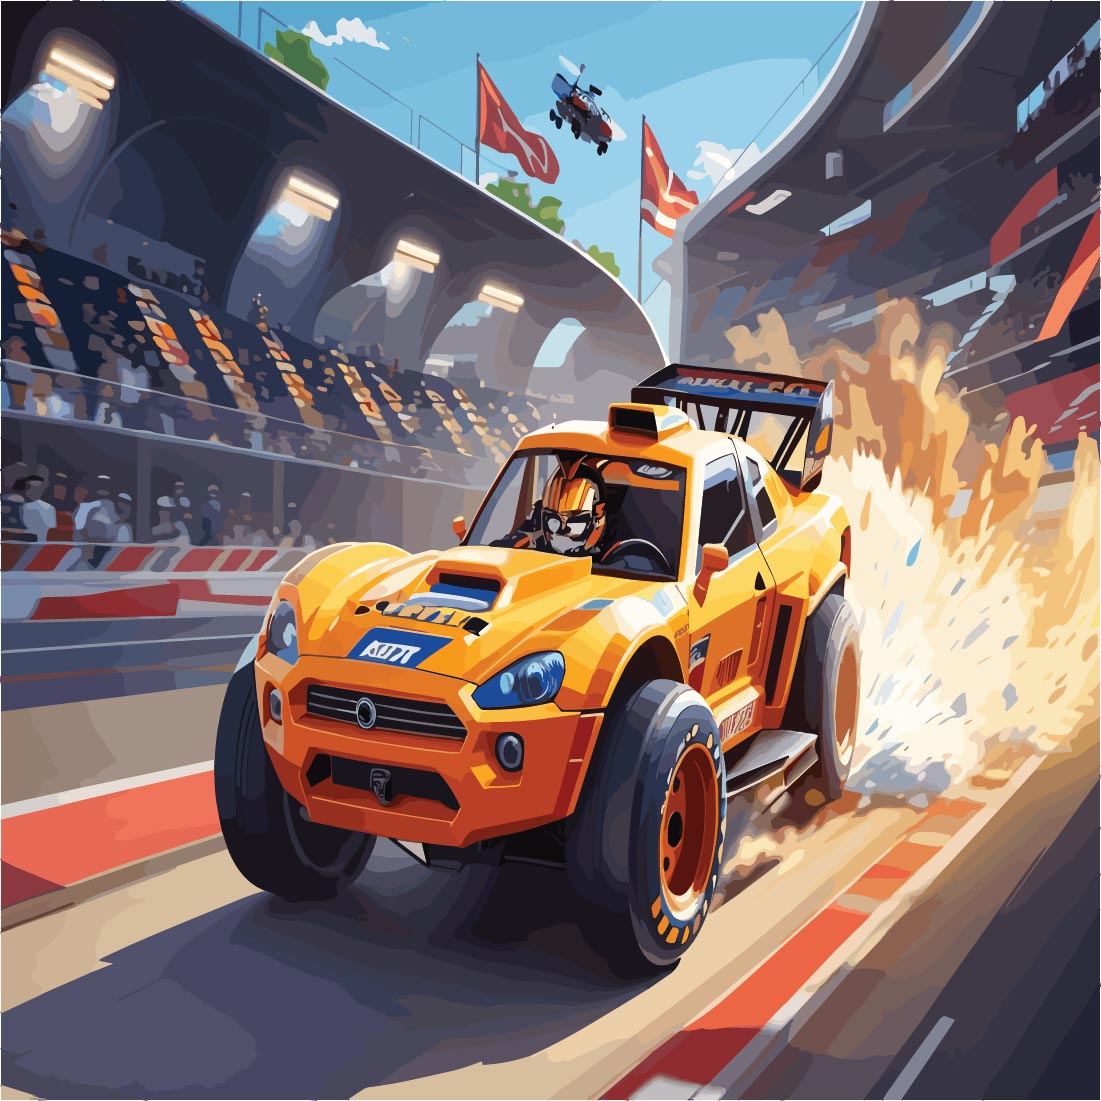 aspalt nitro car racing 2d and animated preview image.